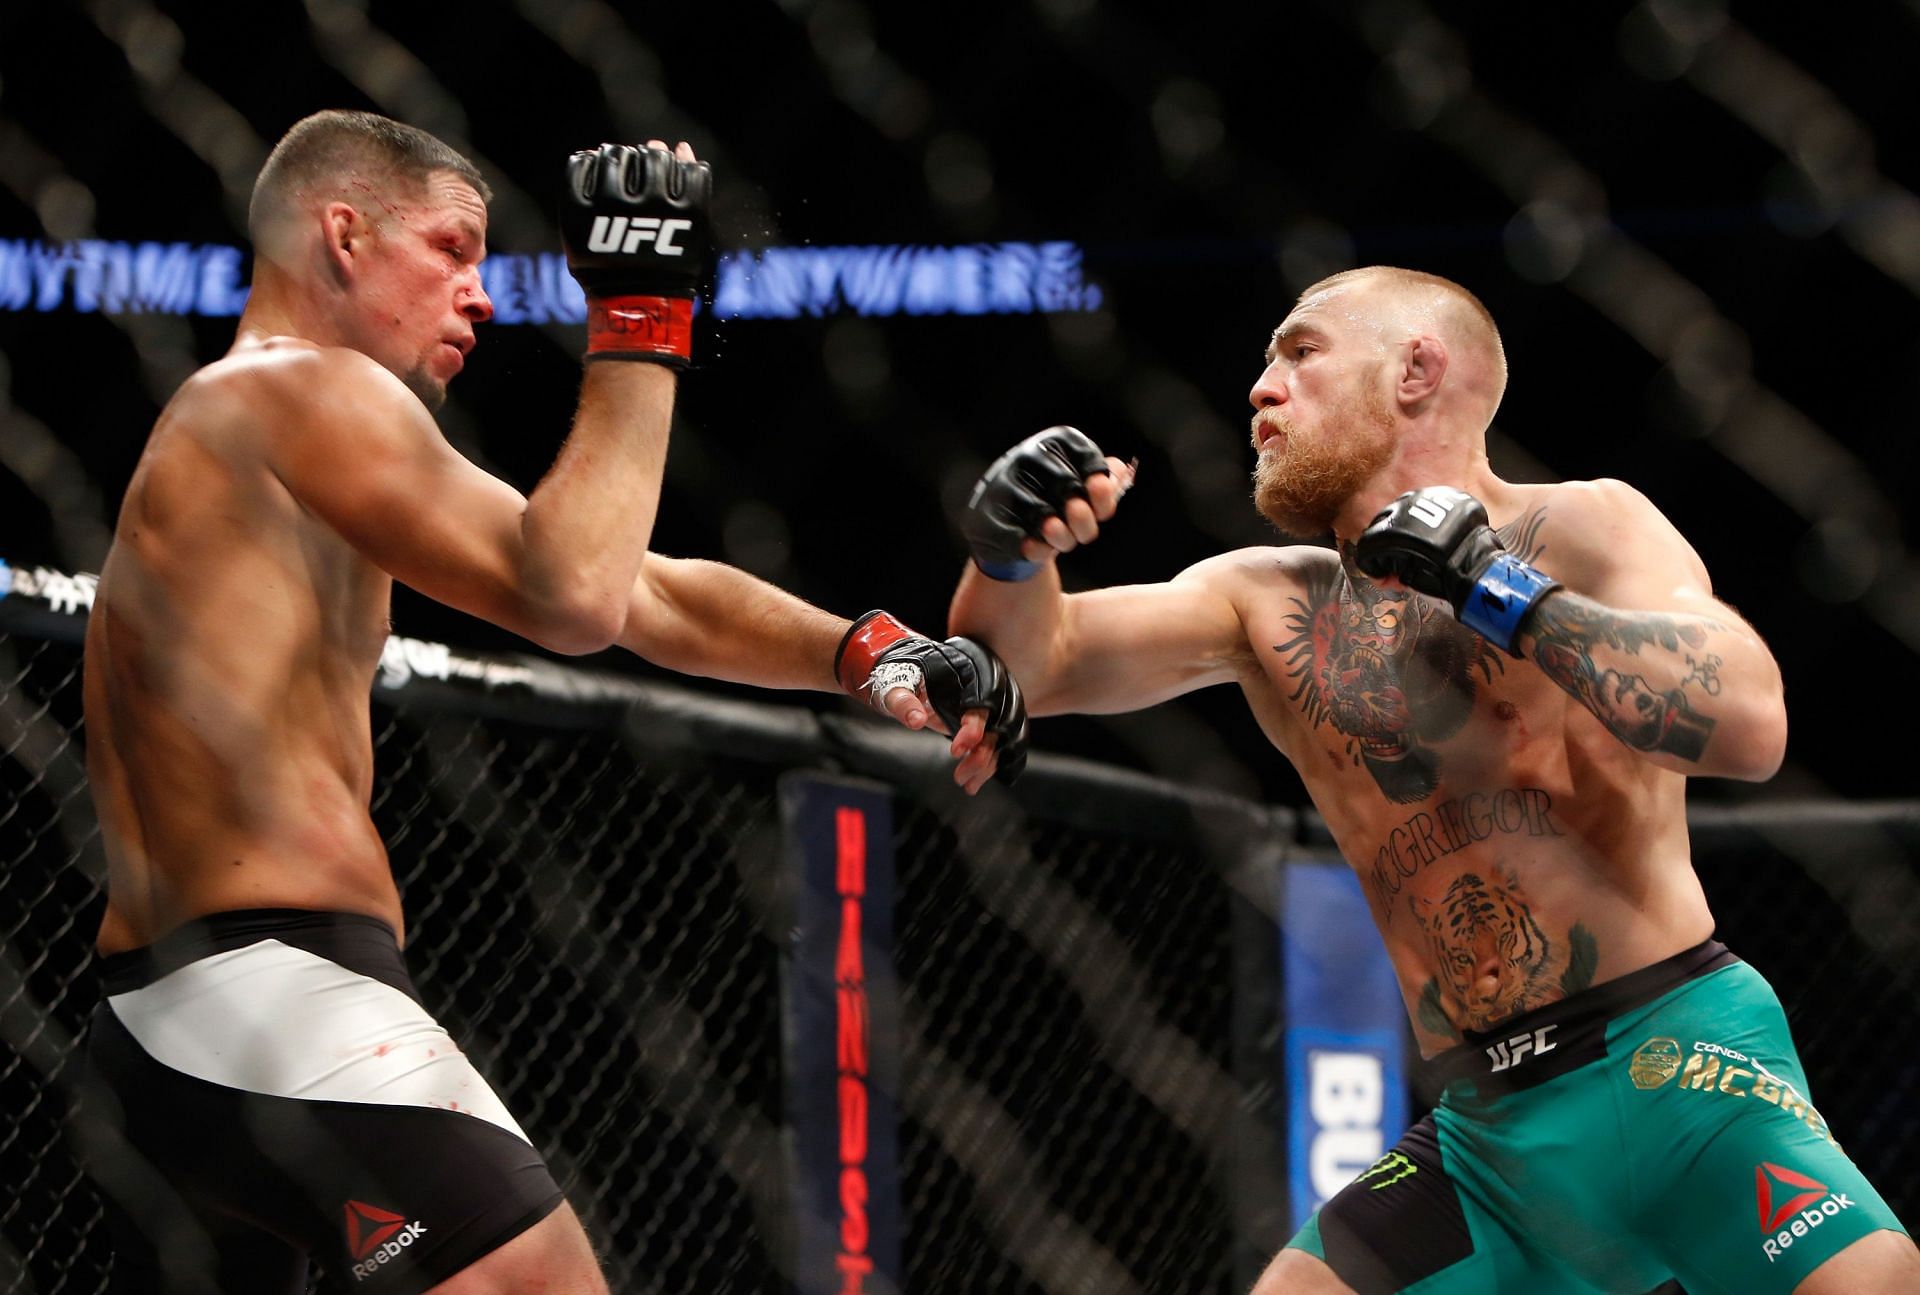 McGregor has never been involved in a boring fight during his UFC career